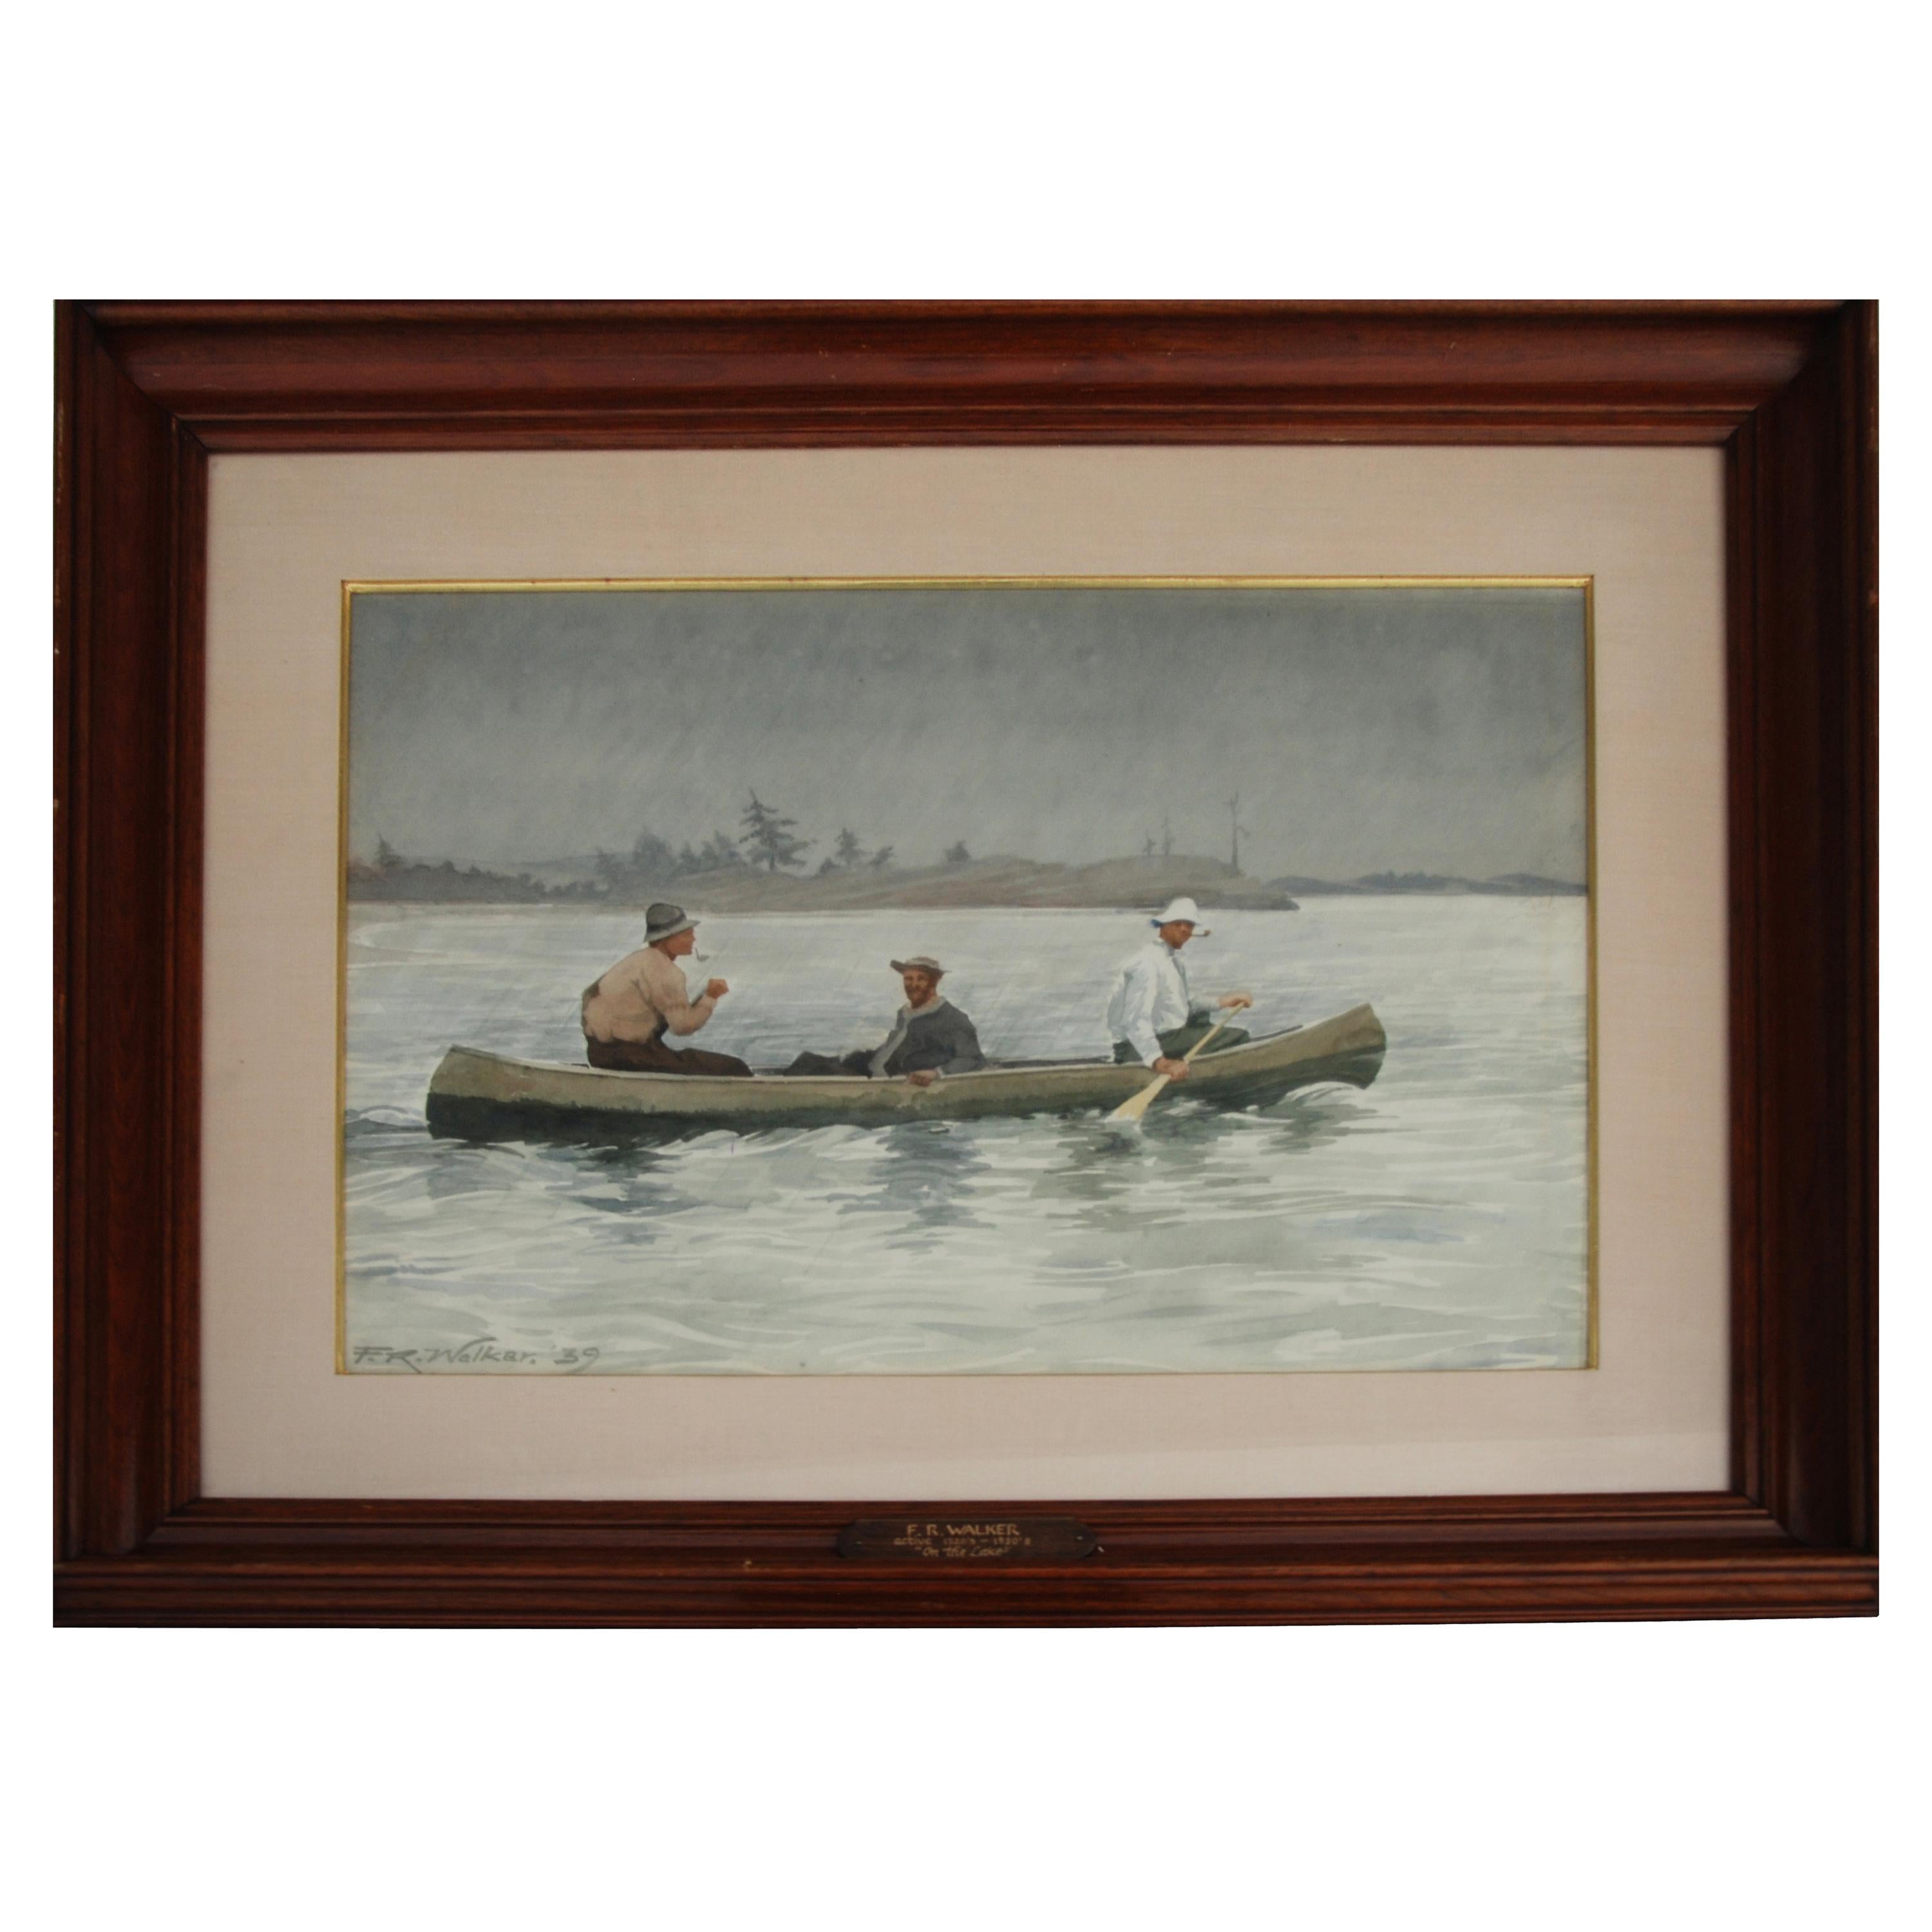 1939 Watercolor by FR Walker in the Manner of Winslow Homer